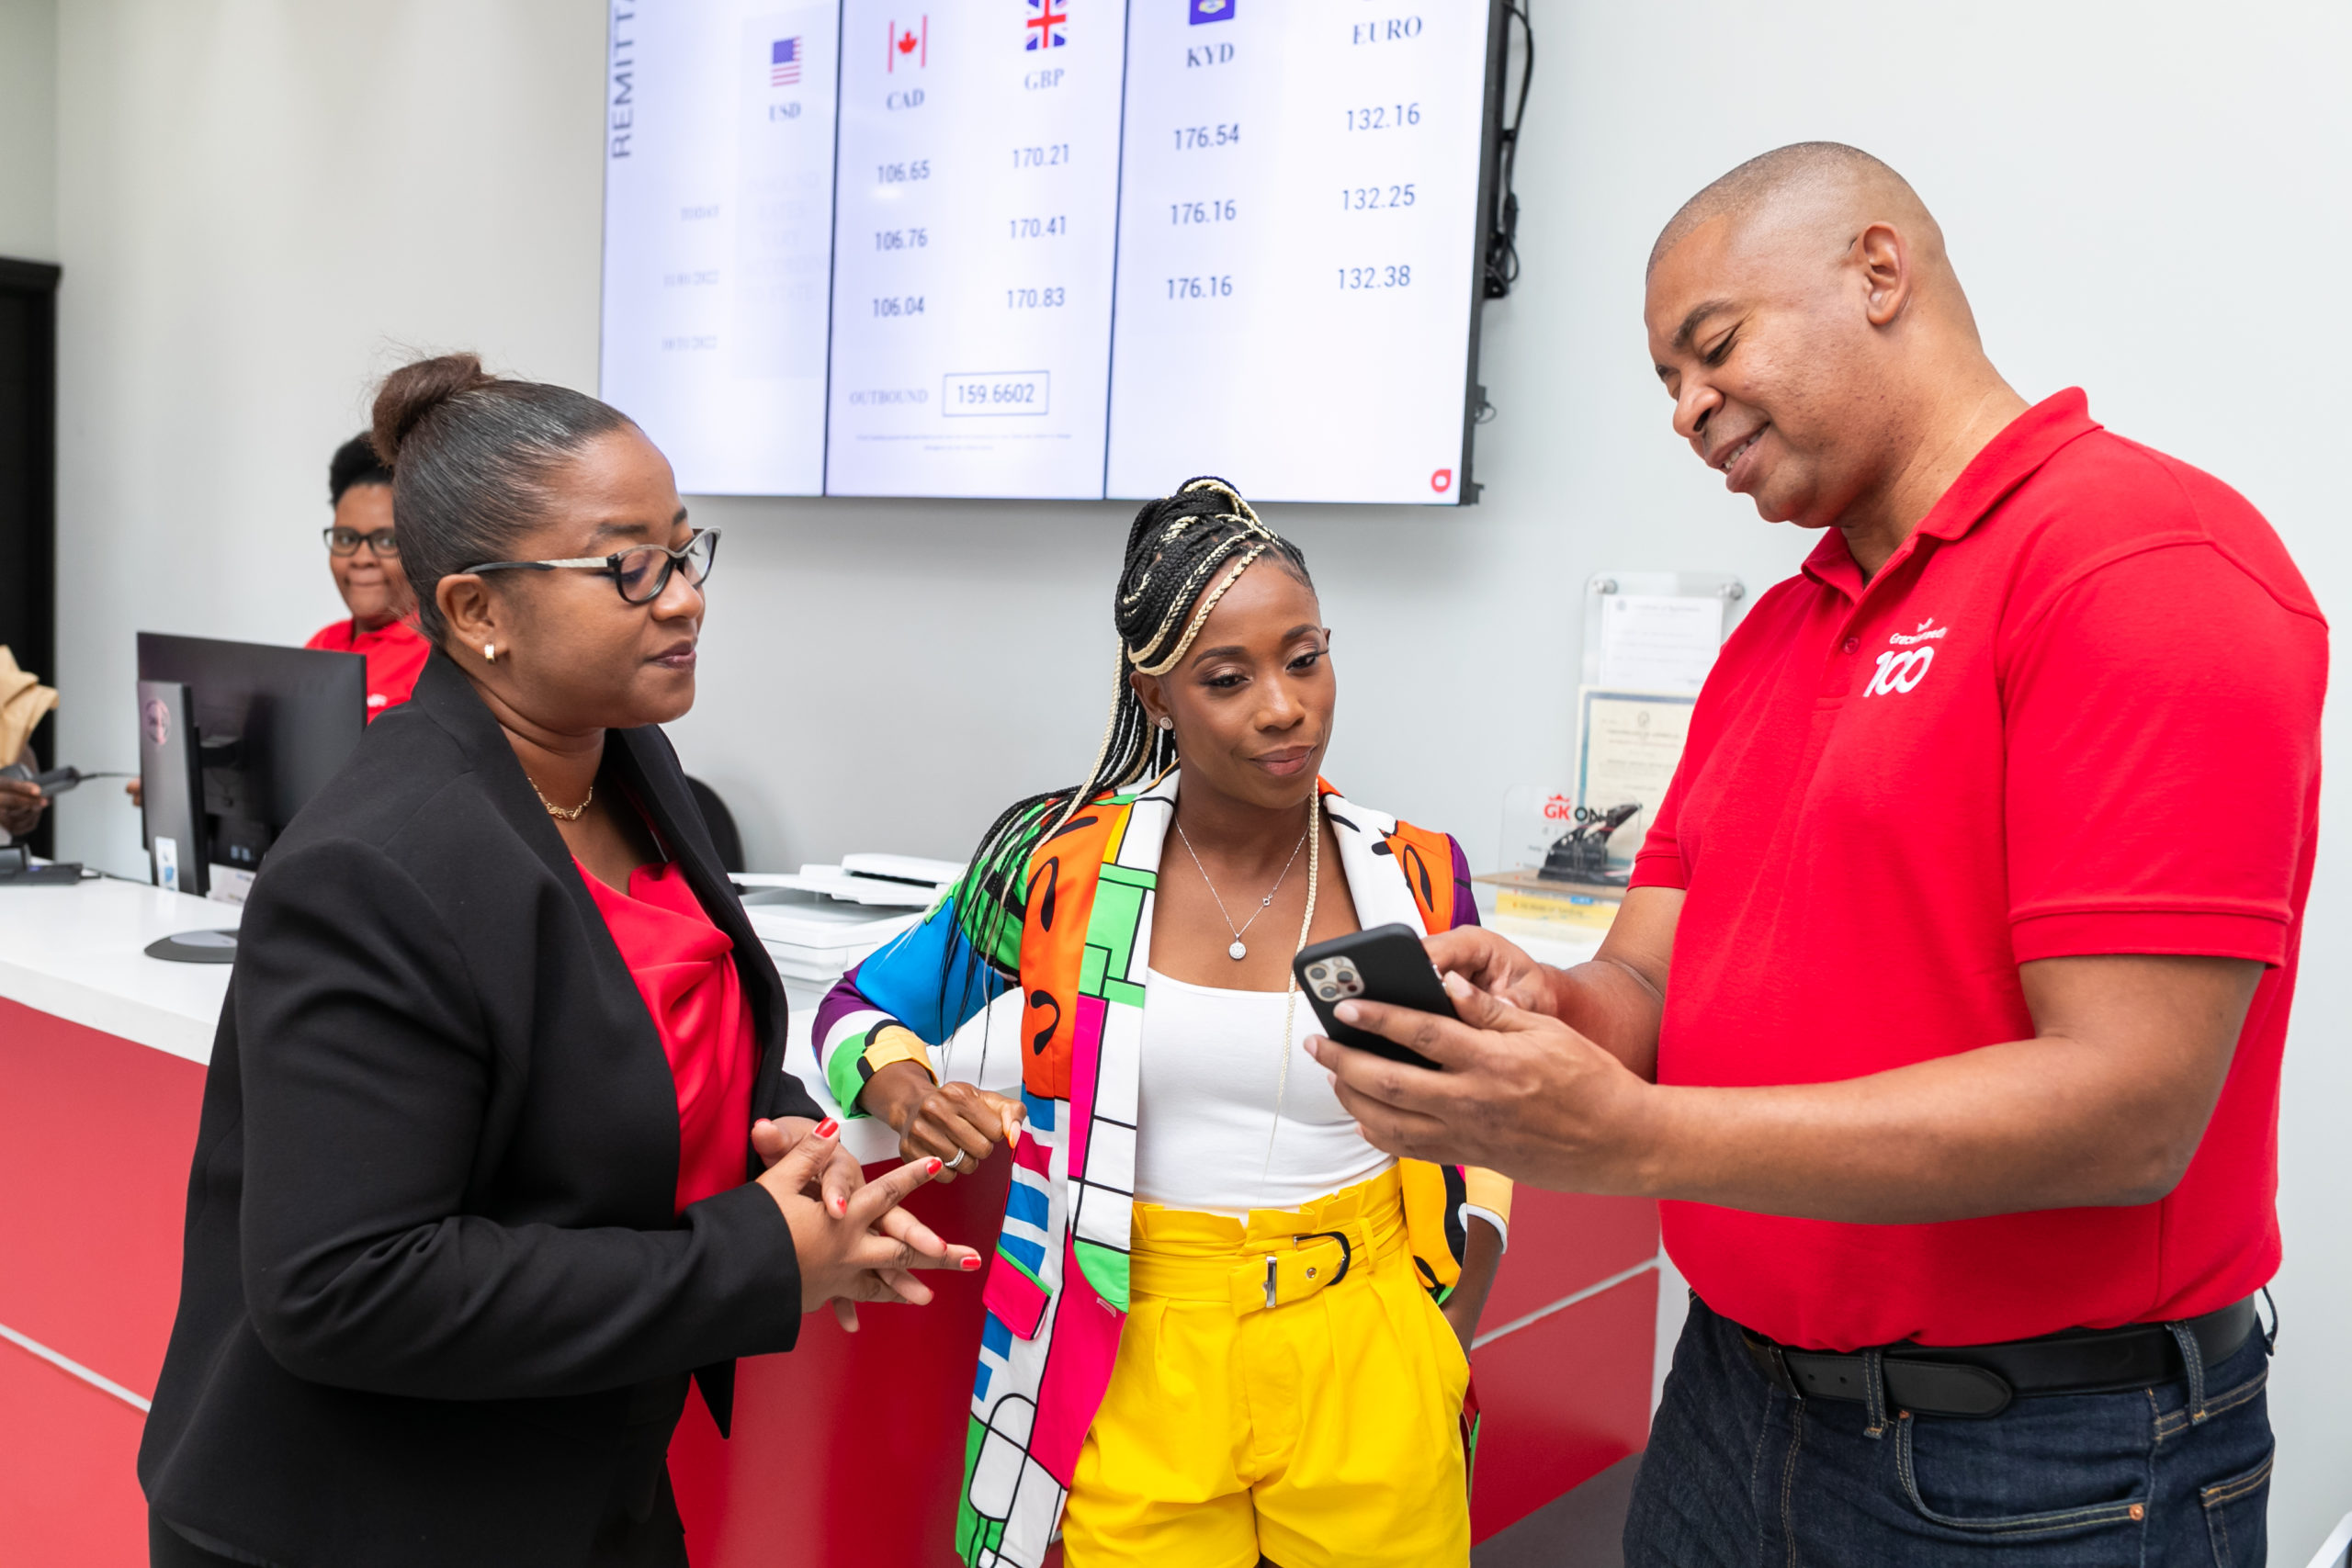 GK ONE App DEMO: GraceKennedy Brand Ambassador and face of the GK ONE pre-paid Visa Debit Card, Olympian, and World Champion Shelly-Ann Fraser – Pryce getting a personal tutorial on how to use the App from Rickard Ebanks, GraceKennedy Chief Digital Officer while Annalise Harewood, Regional Manager, Digital Operations, GraceKennedy Money Services looks on. Over 290 million Jamaican dollars in Western Union remittances have been received in the app with GK ONE saying that 69% of customers are repeat users.